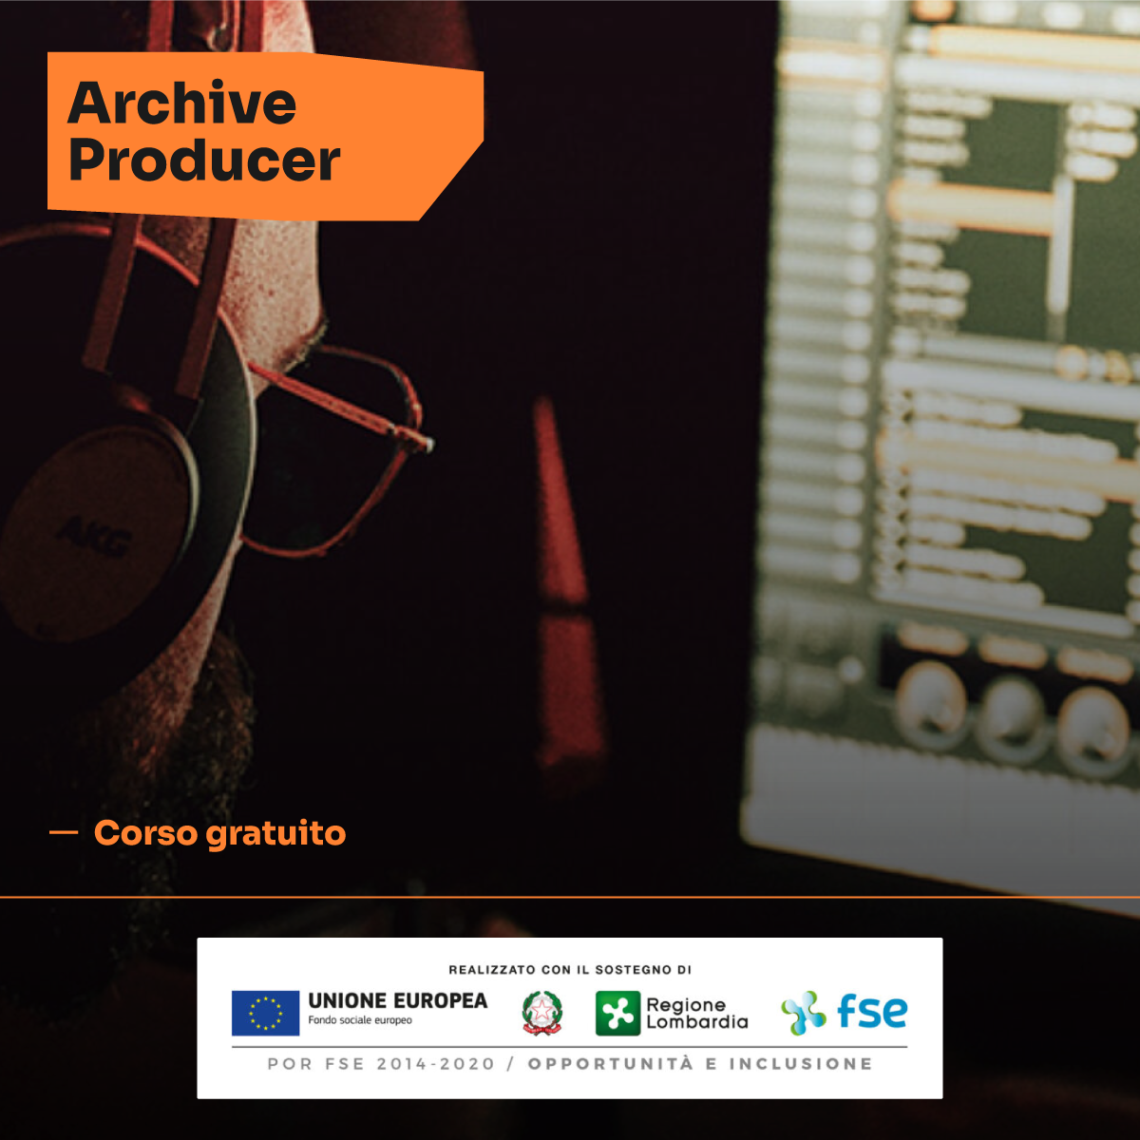 Archive producer